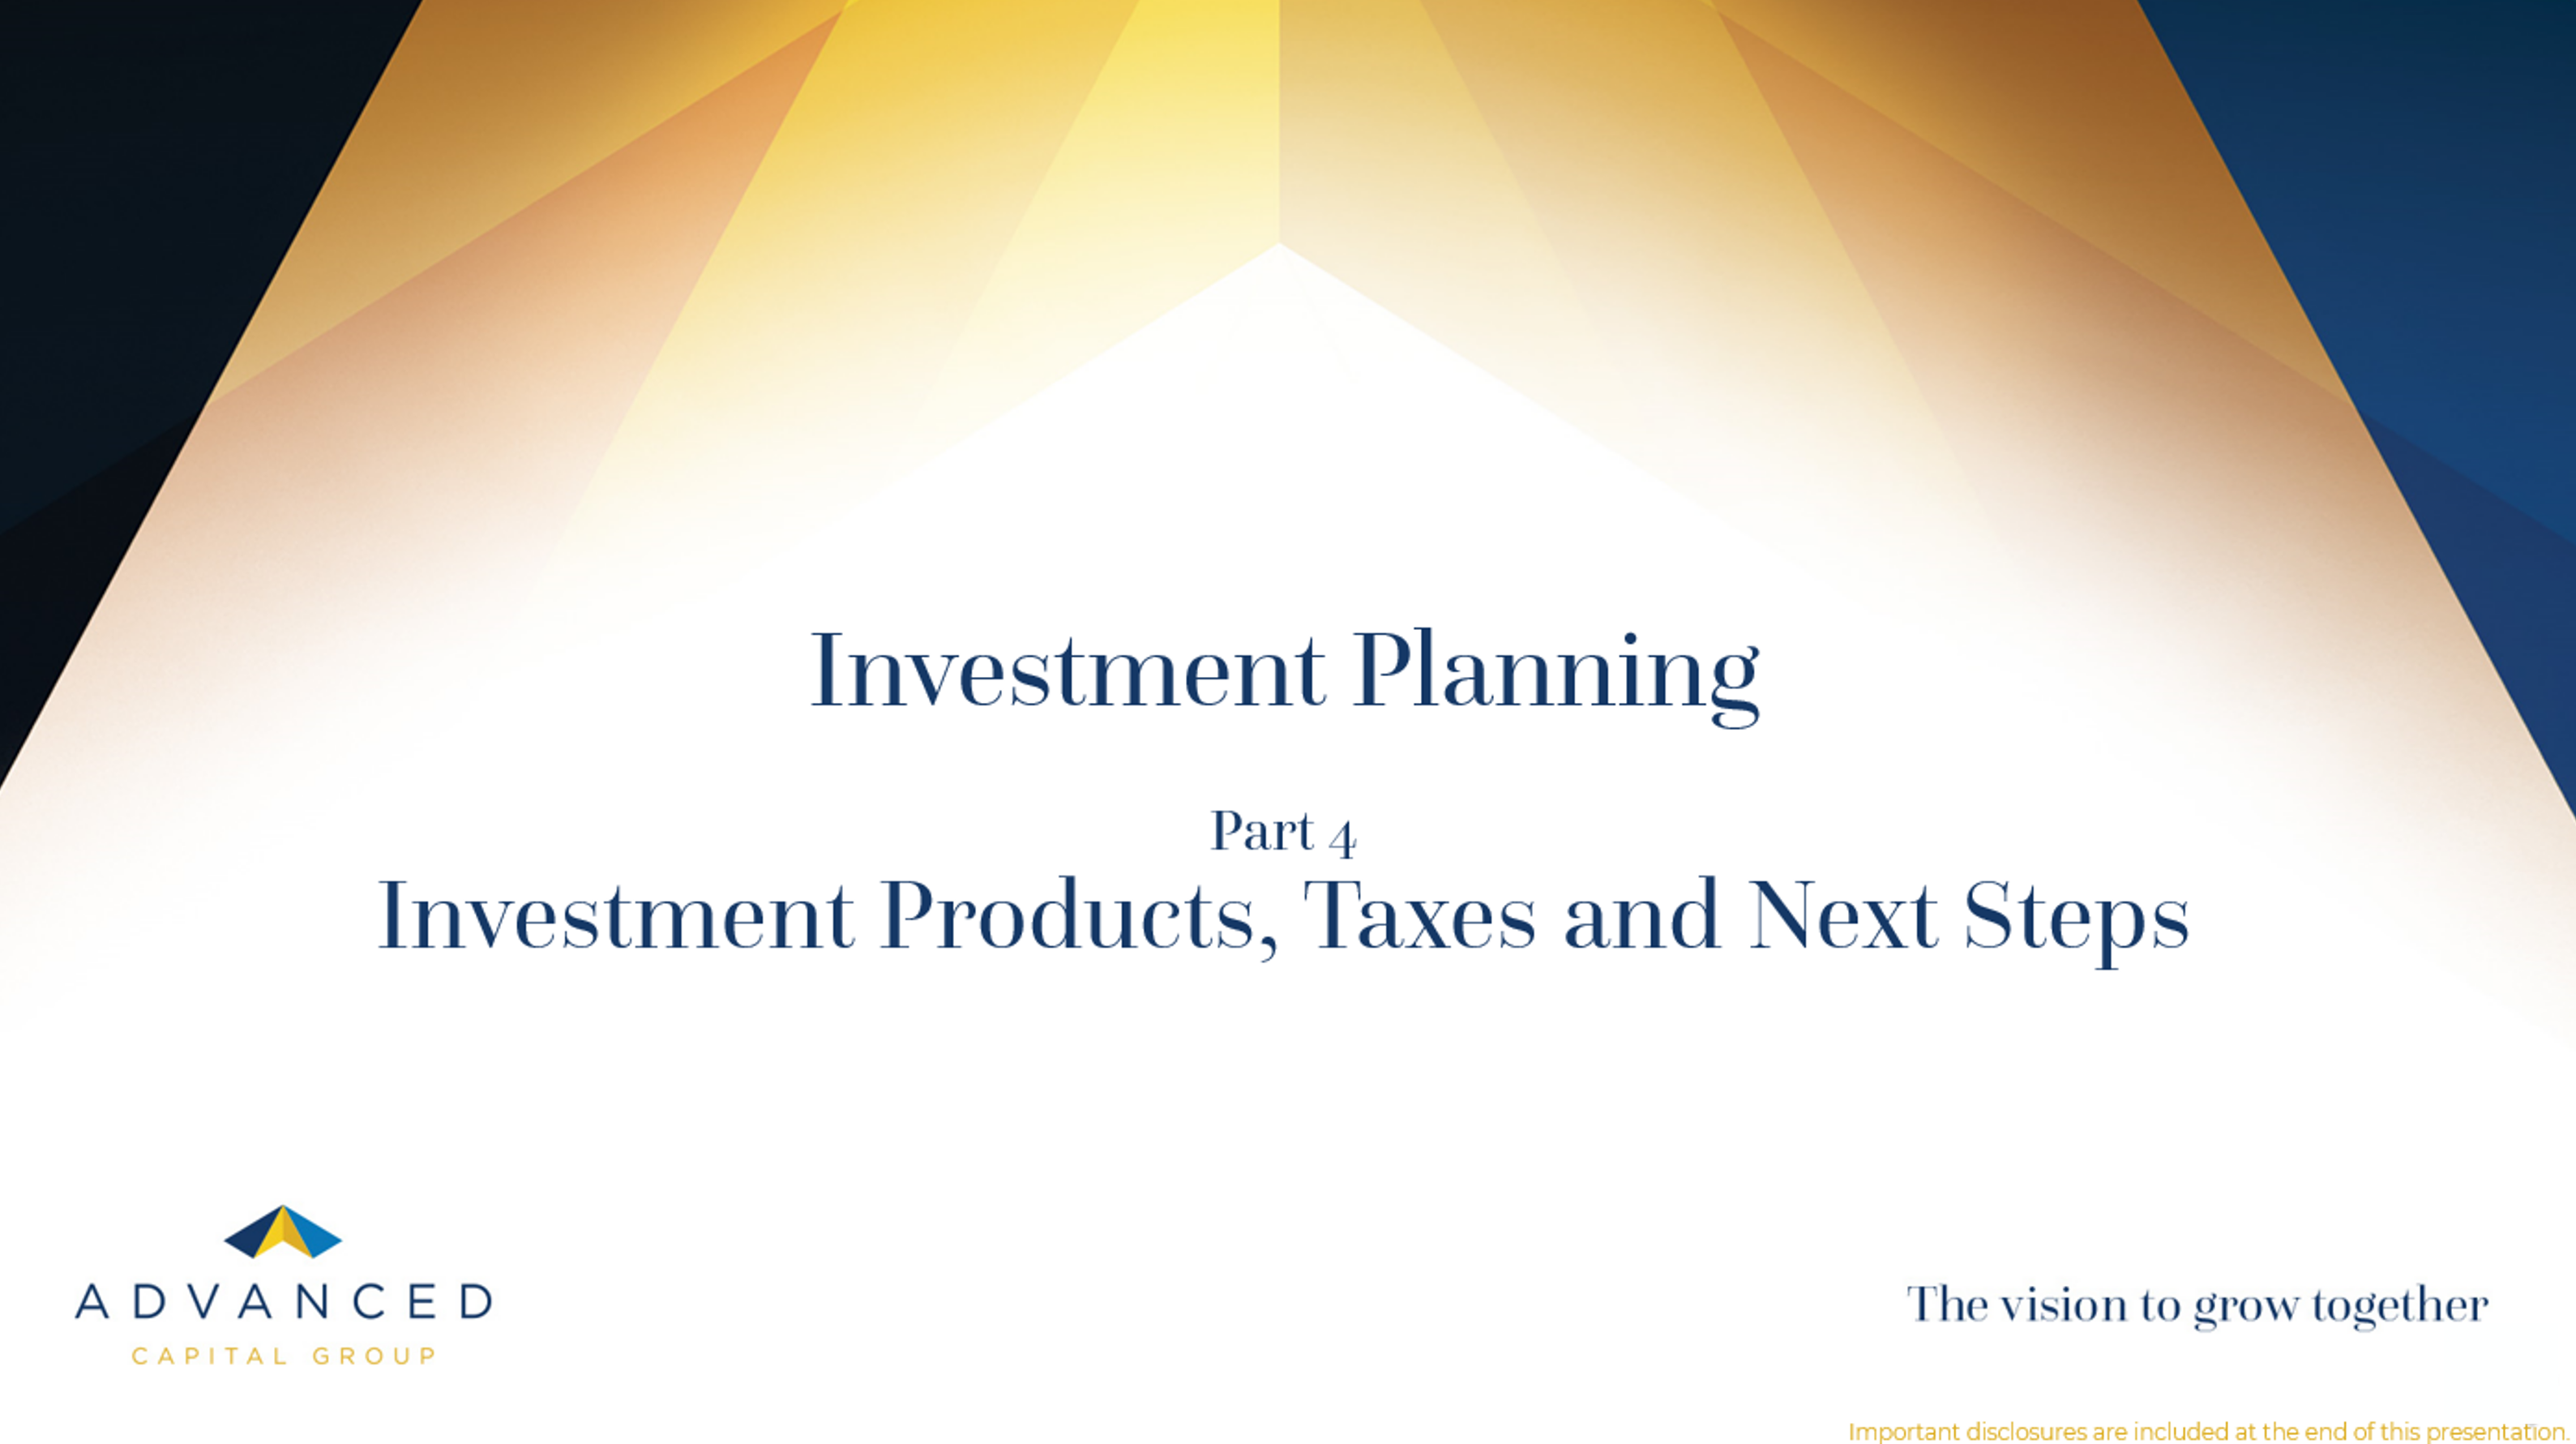 Investment Planning - Investment Products and Next Steps